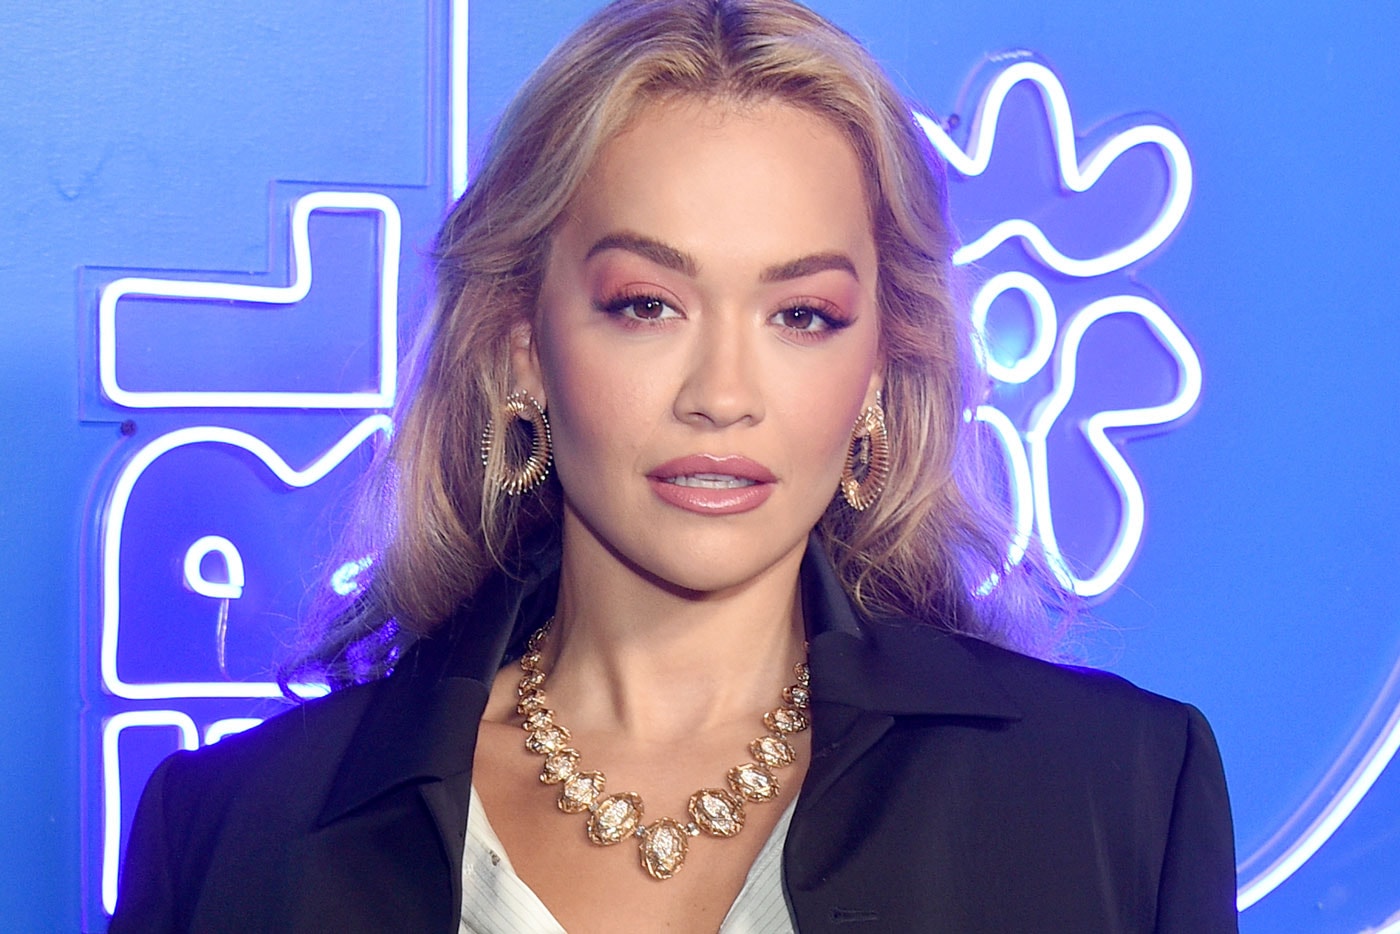 Rita Ora Sues Roc Nation, Wants to Exit Contract